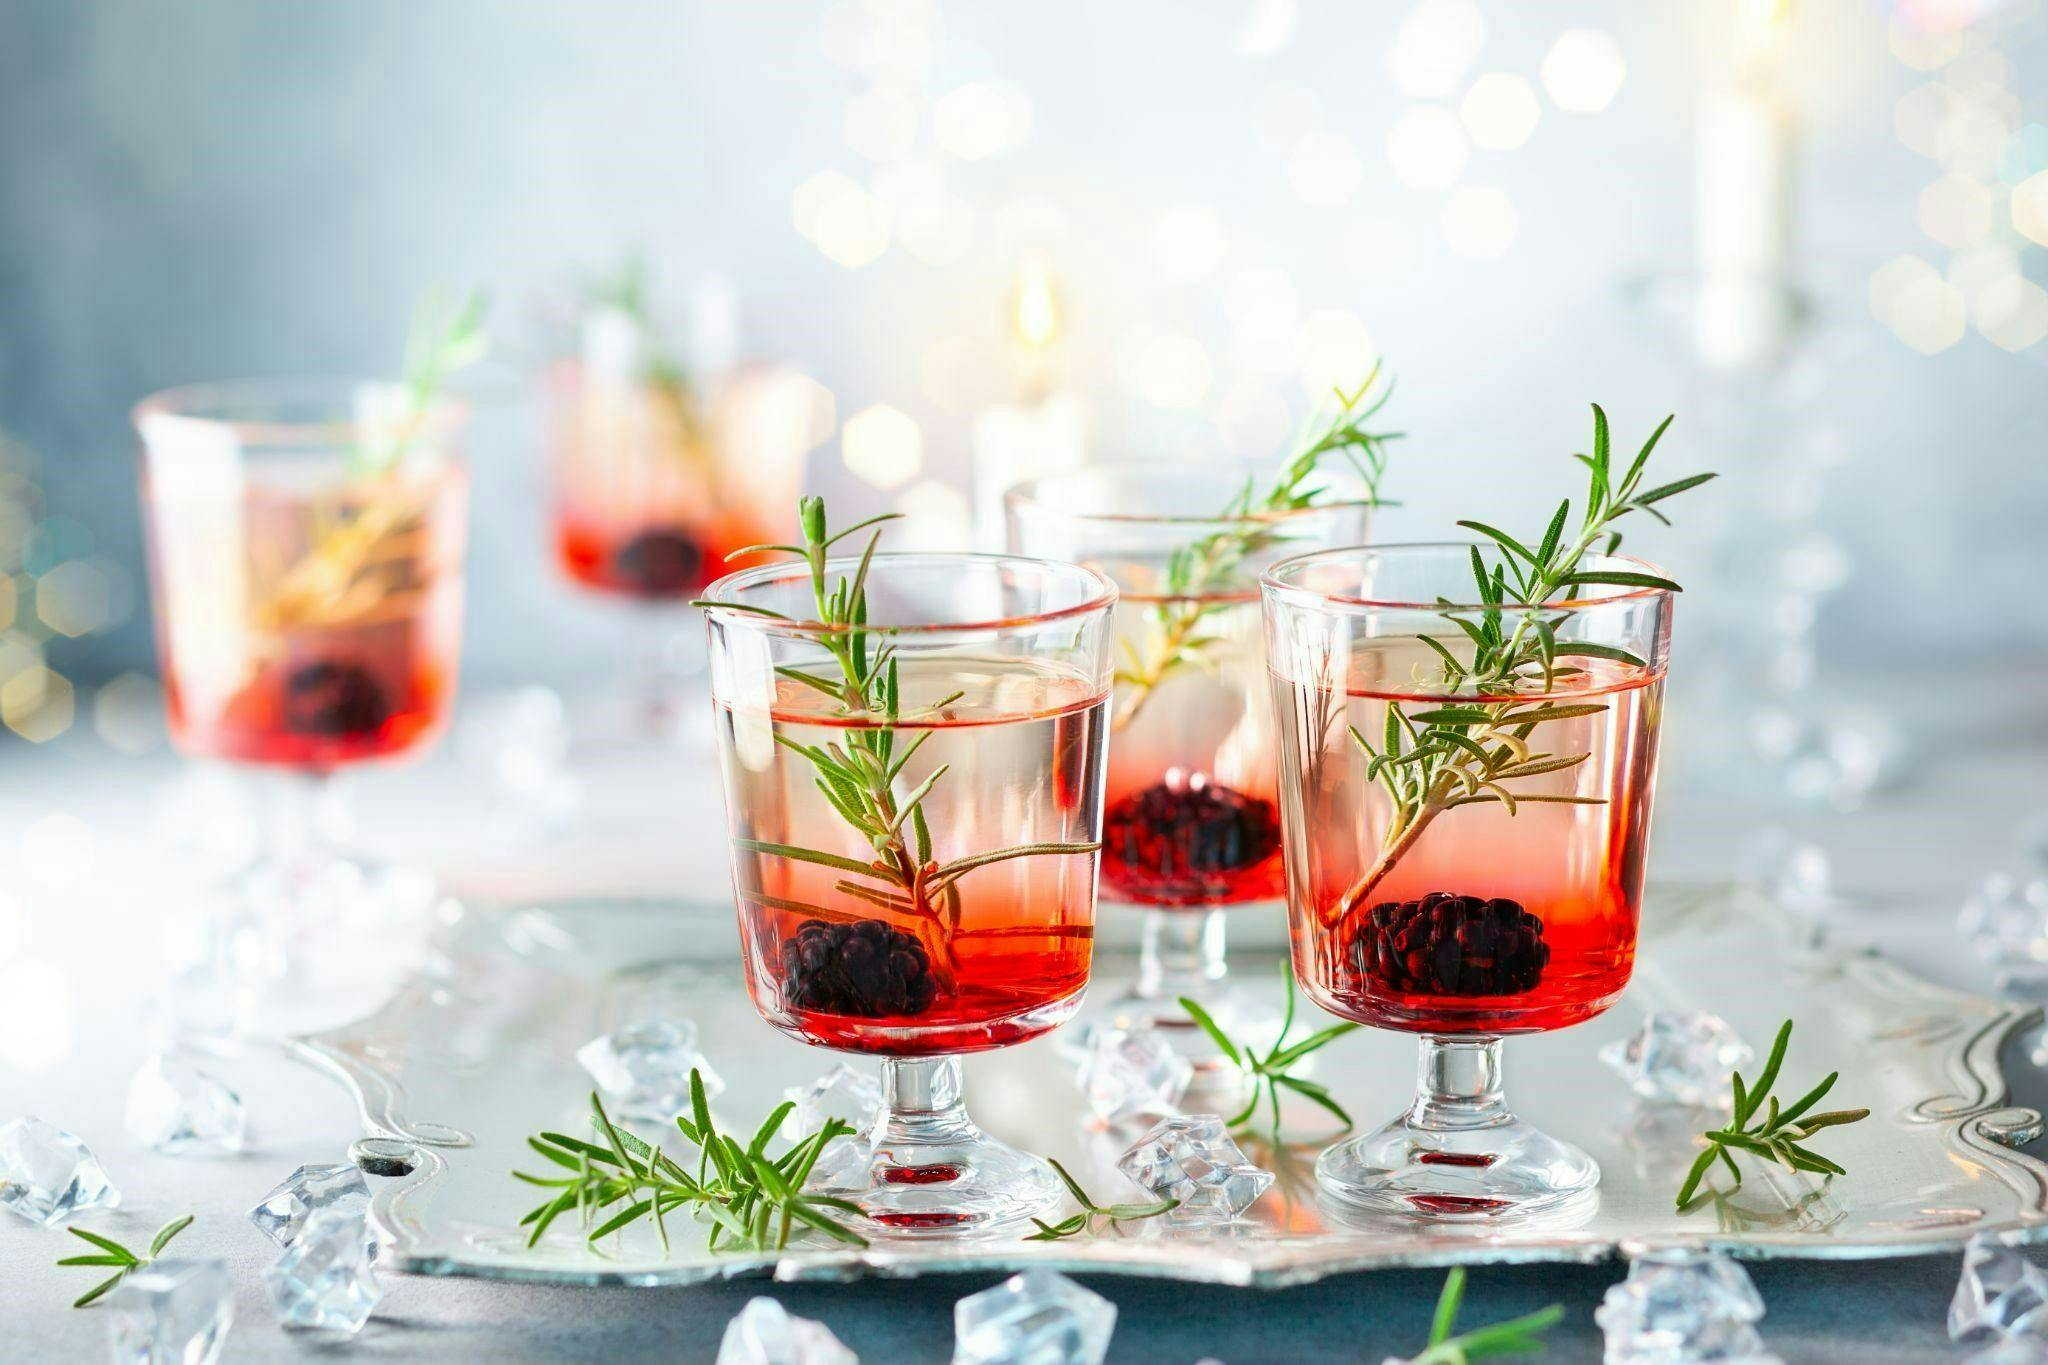 Ways to Serve Water Image of Winter Berry Cocktails